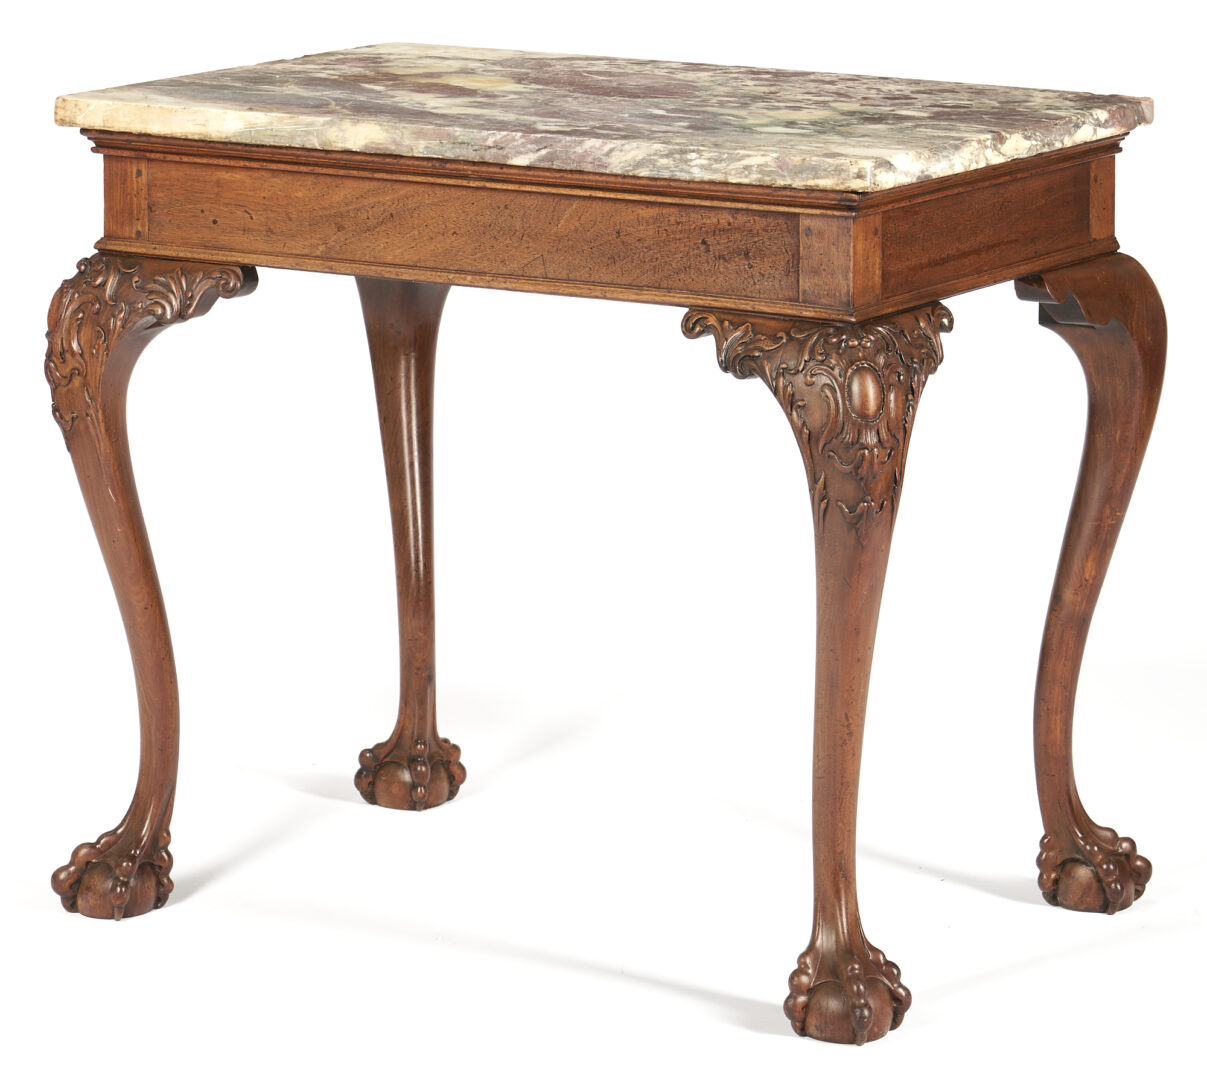 Lot 198: Near Pair Chippendale Style Mahogany and Marble Console Tables